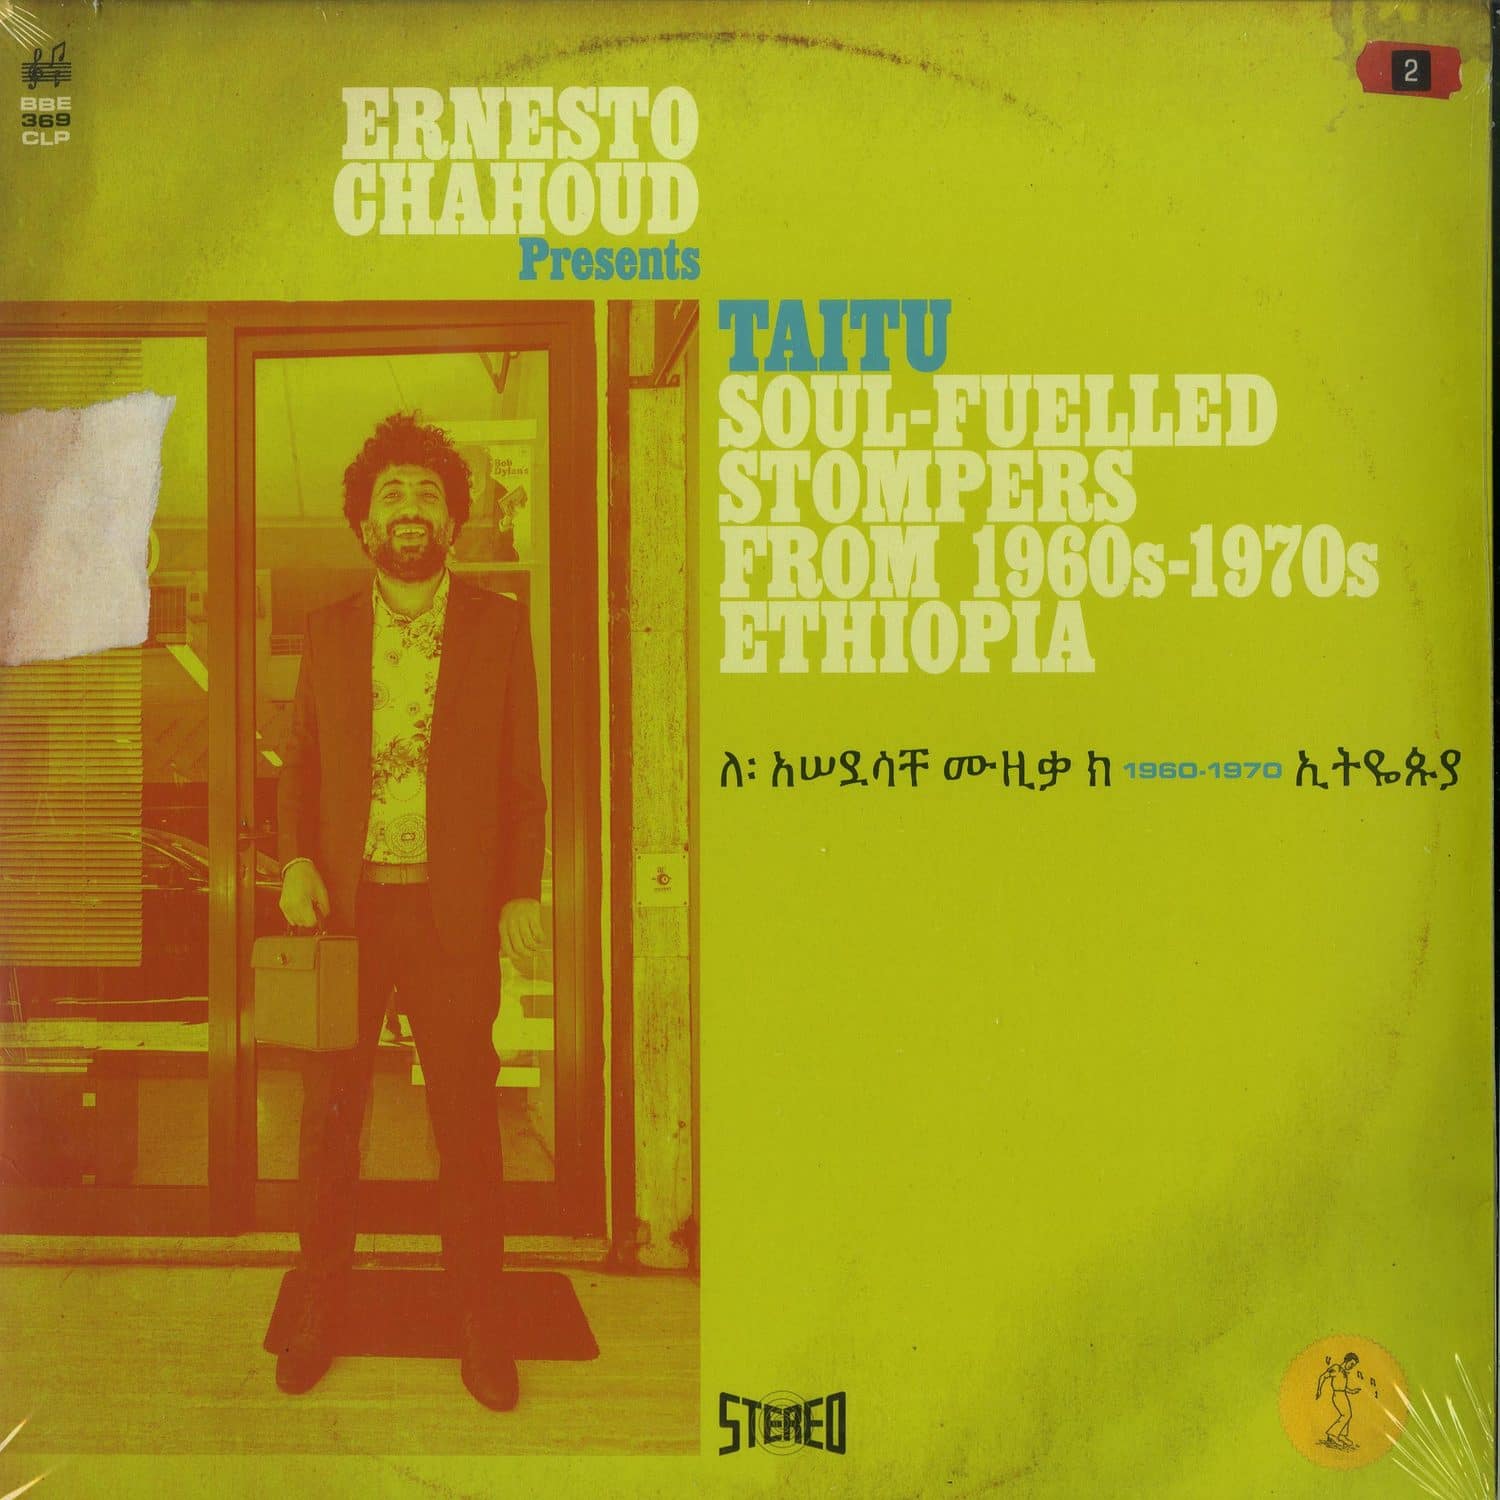 Ernesto Chahoud - TAITU - SOUL-FUELLED STOMPERS FROM 1960S-1970S ETHIOPIA 